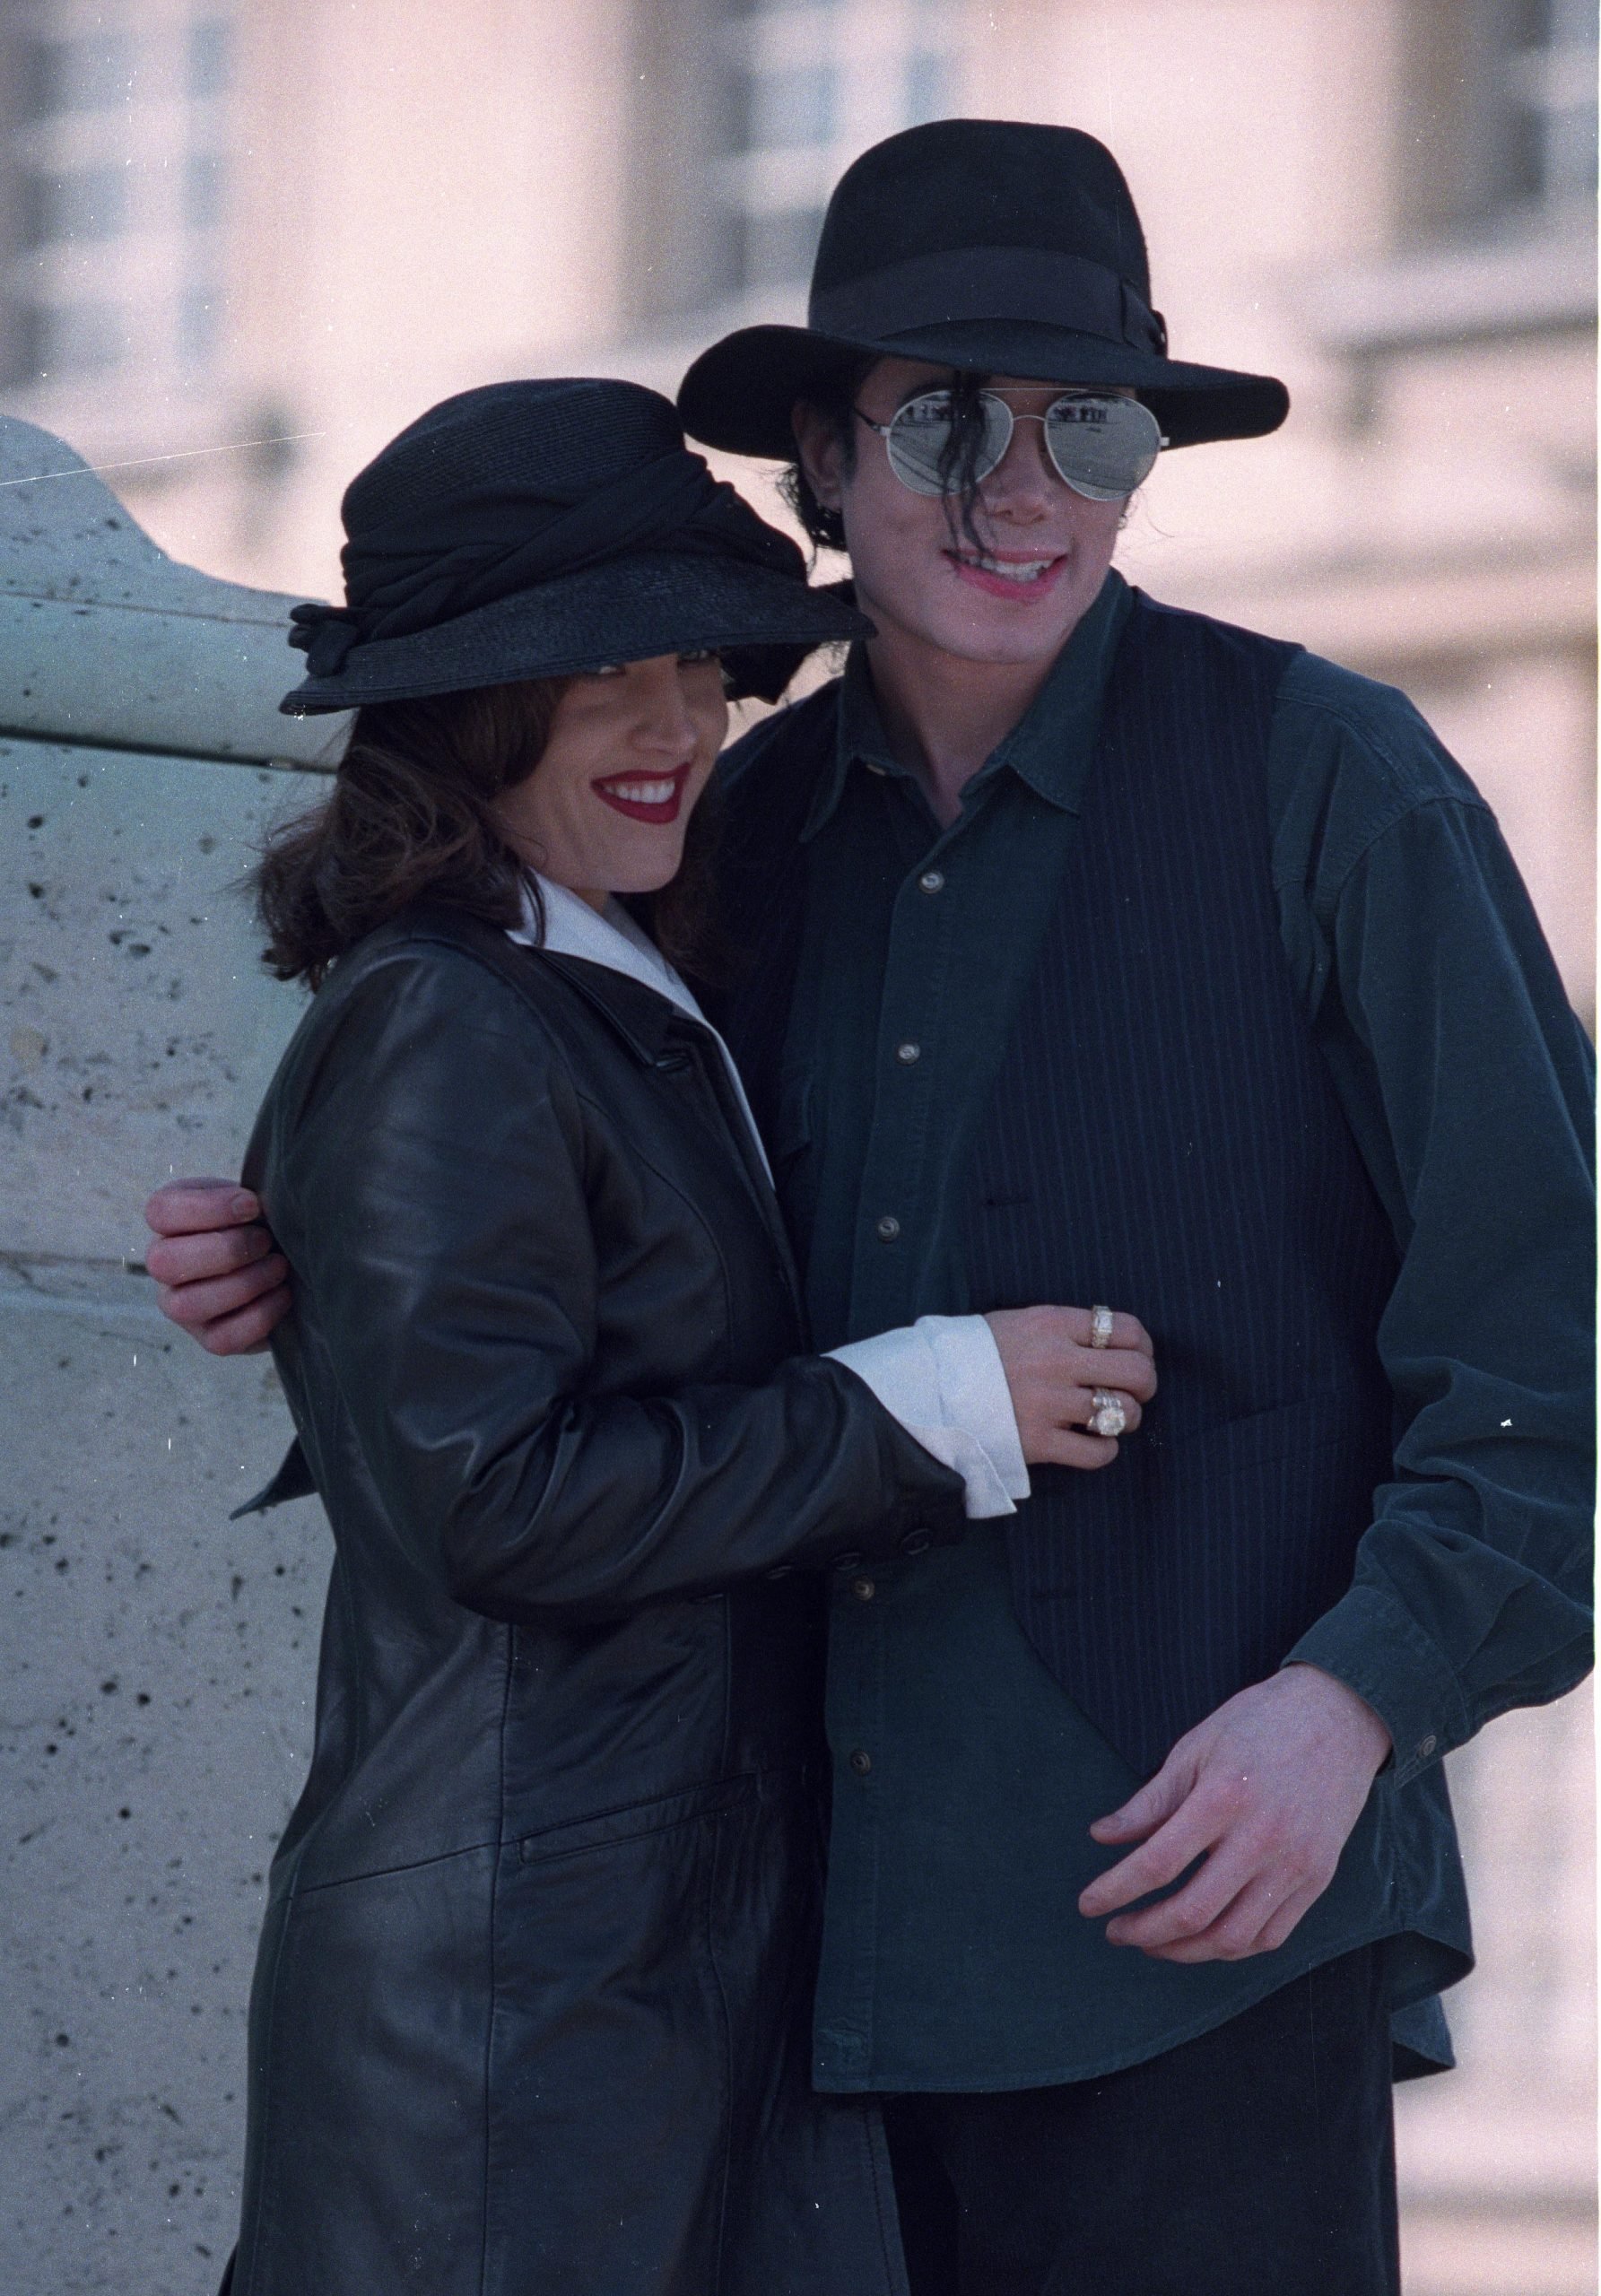 PARIS - Michael Jackson and wife Lisa Marie Presley in 1995 at Versailles, France.